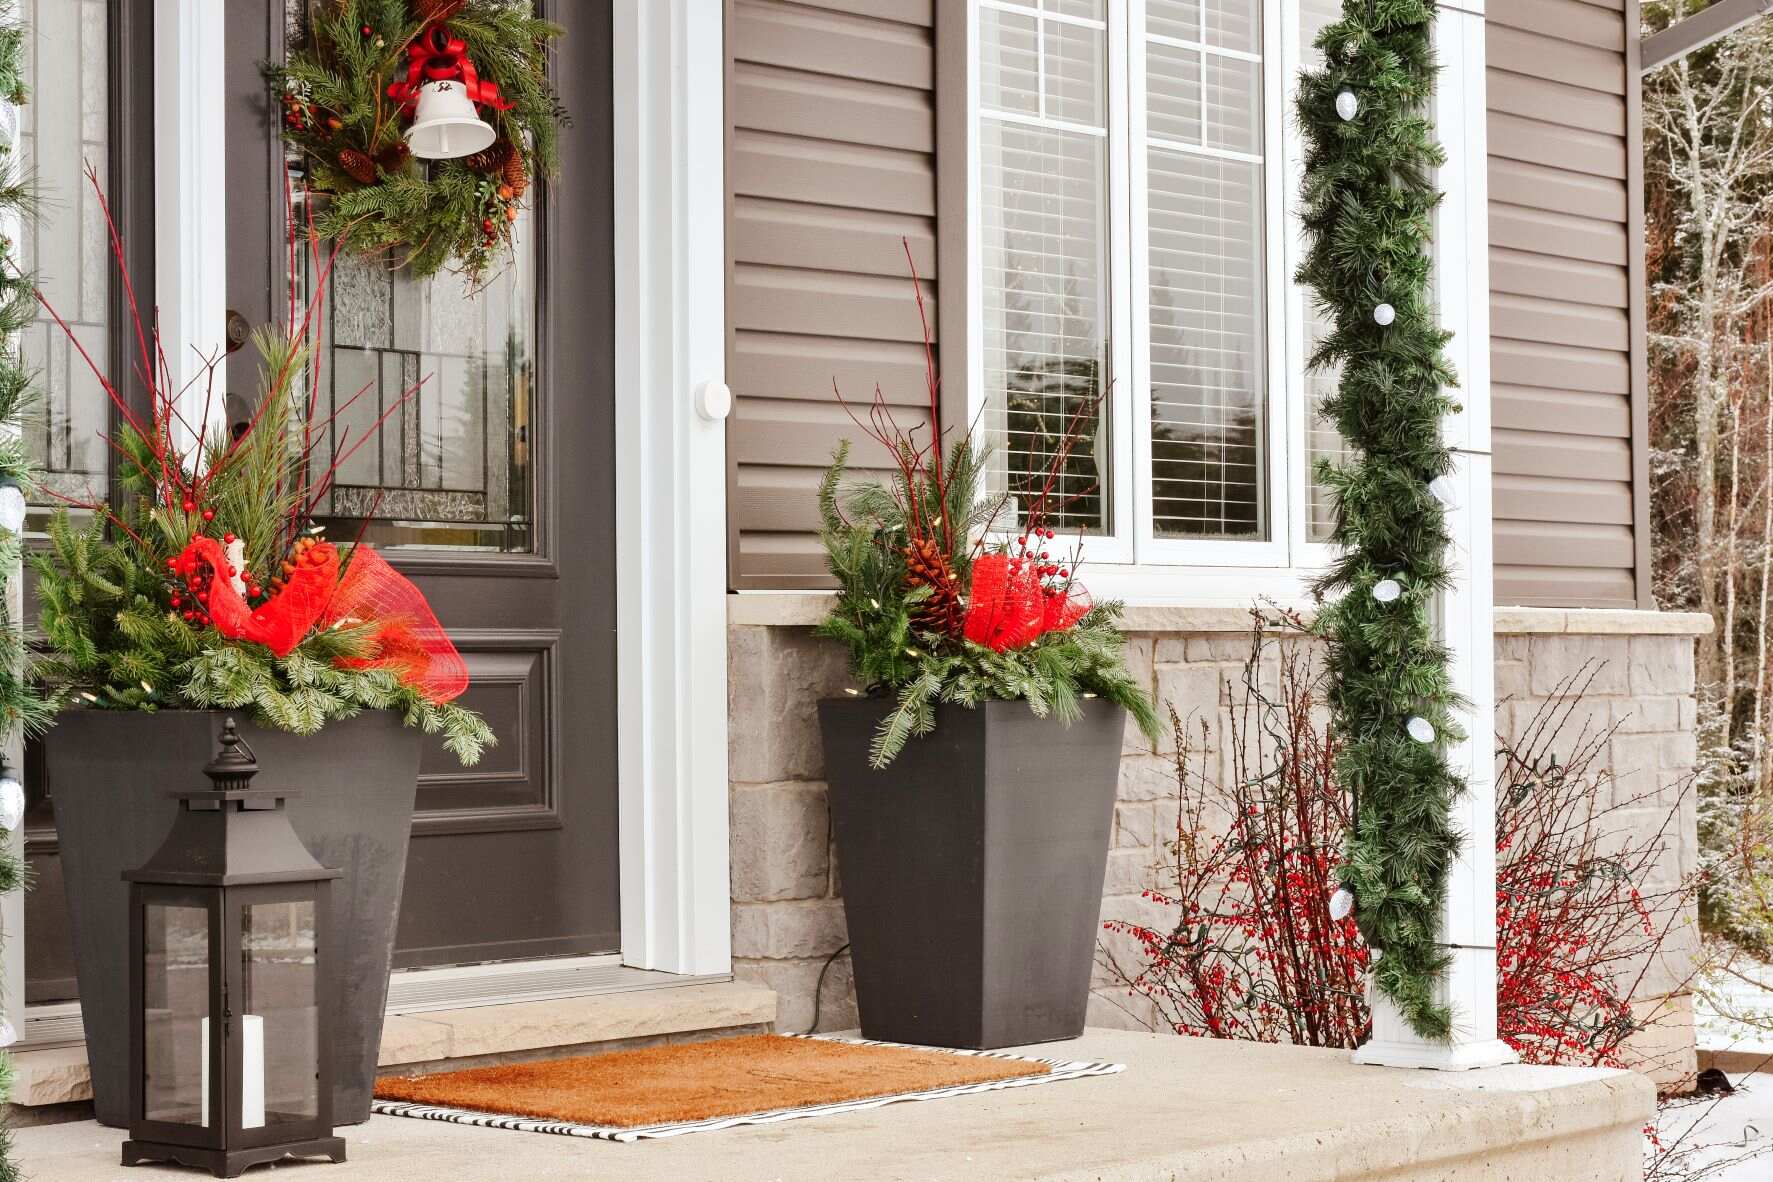 How To Decorate A Front Porch For Christmas